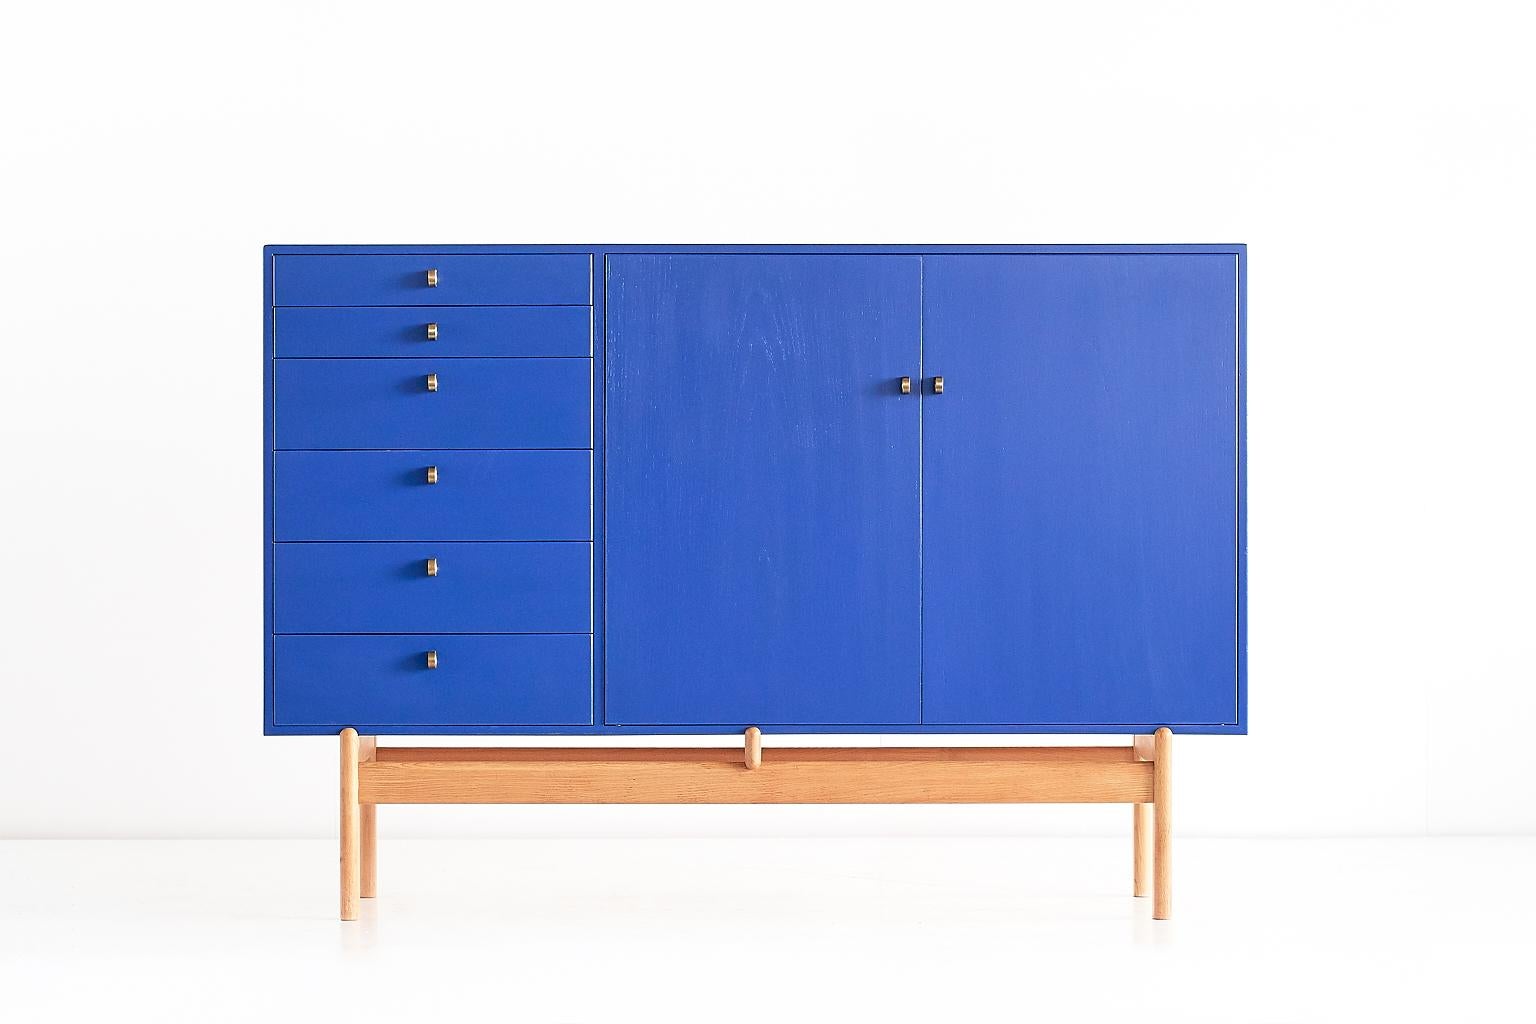 This striking cabinet was designed by Tove and Edvard Kindt Larsen and produced by the Swedish manufacturer Säffle Möbelfabrik in the early 1960s. This design was produced in two versions: one in entirely natural oak and a more rare version in blue